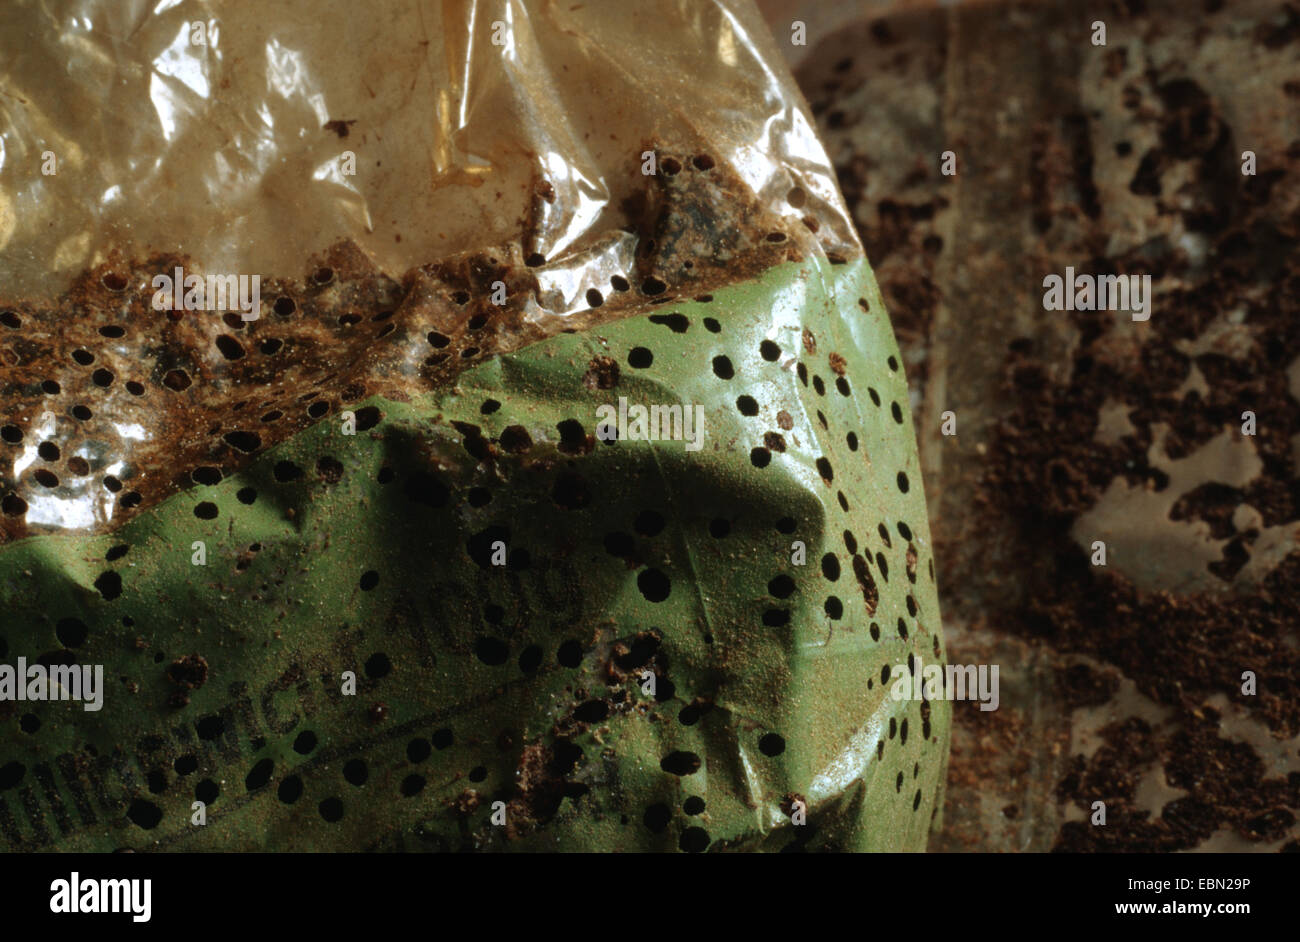 drugstore beetle, drug store weevil, biscuit beetle, bread beetle (Stegobium paniceum), bag with paprika powder infested by the beetle with boreholes of the animals, Germany Stock Photo